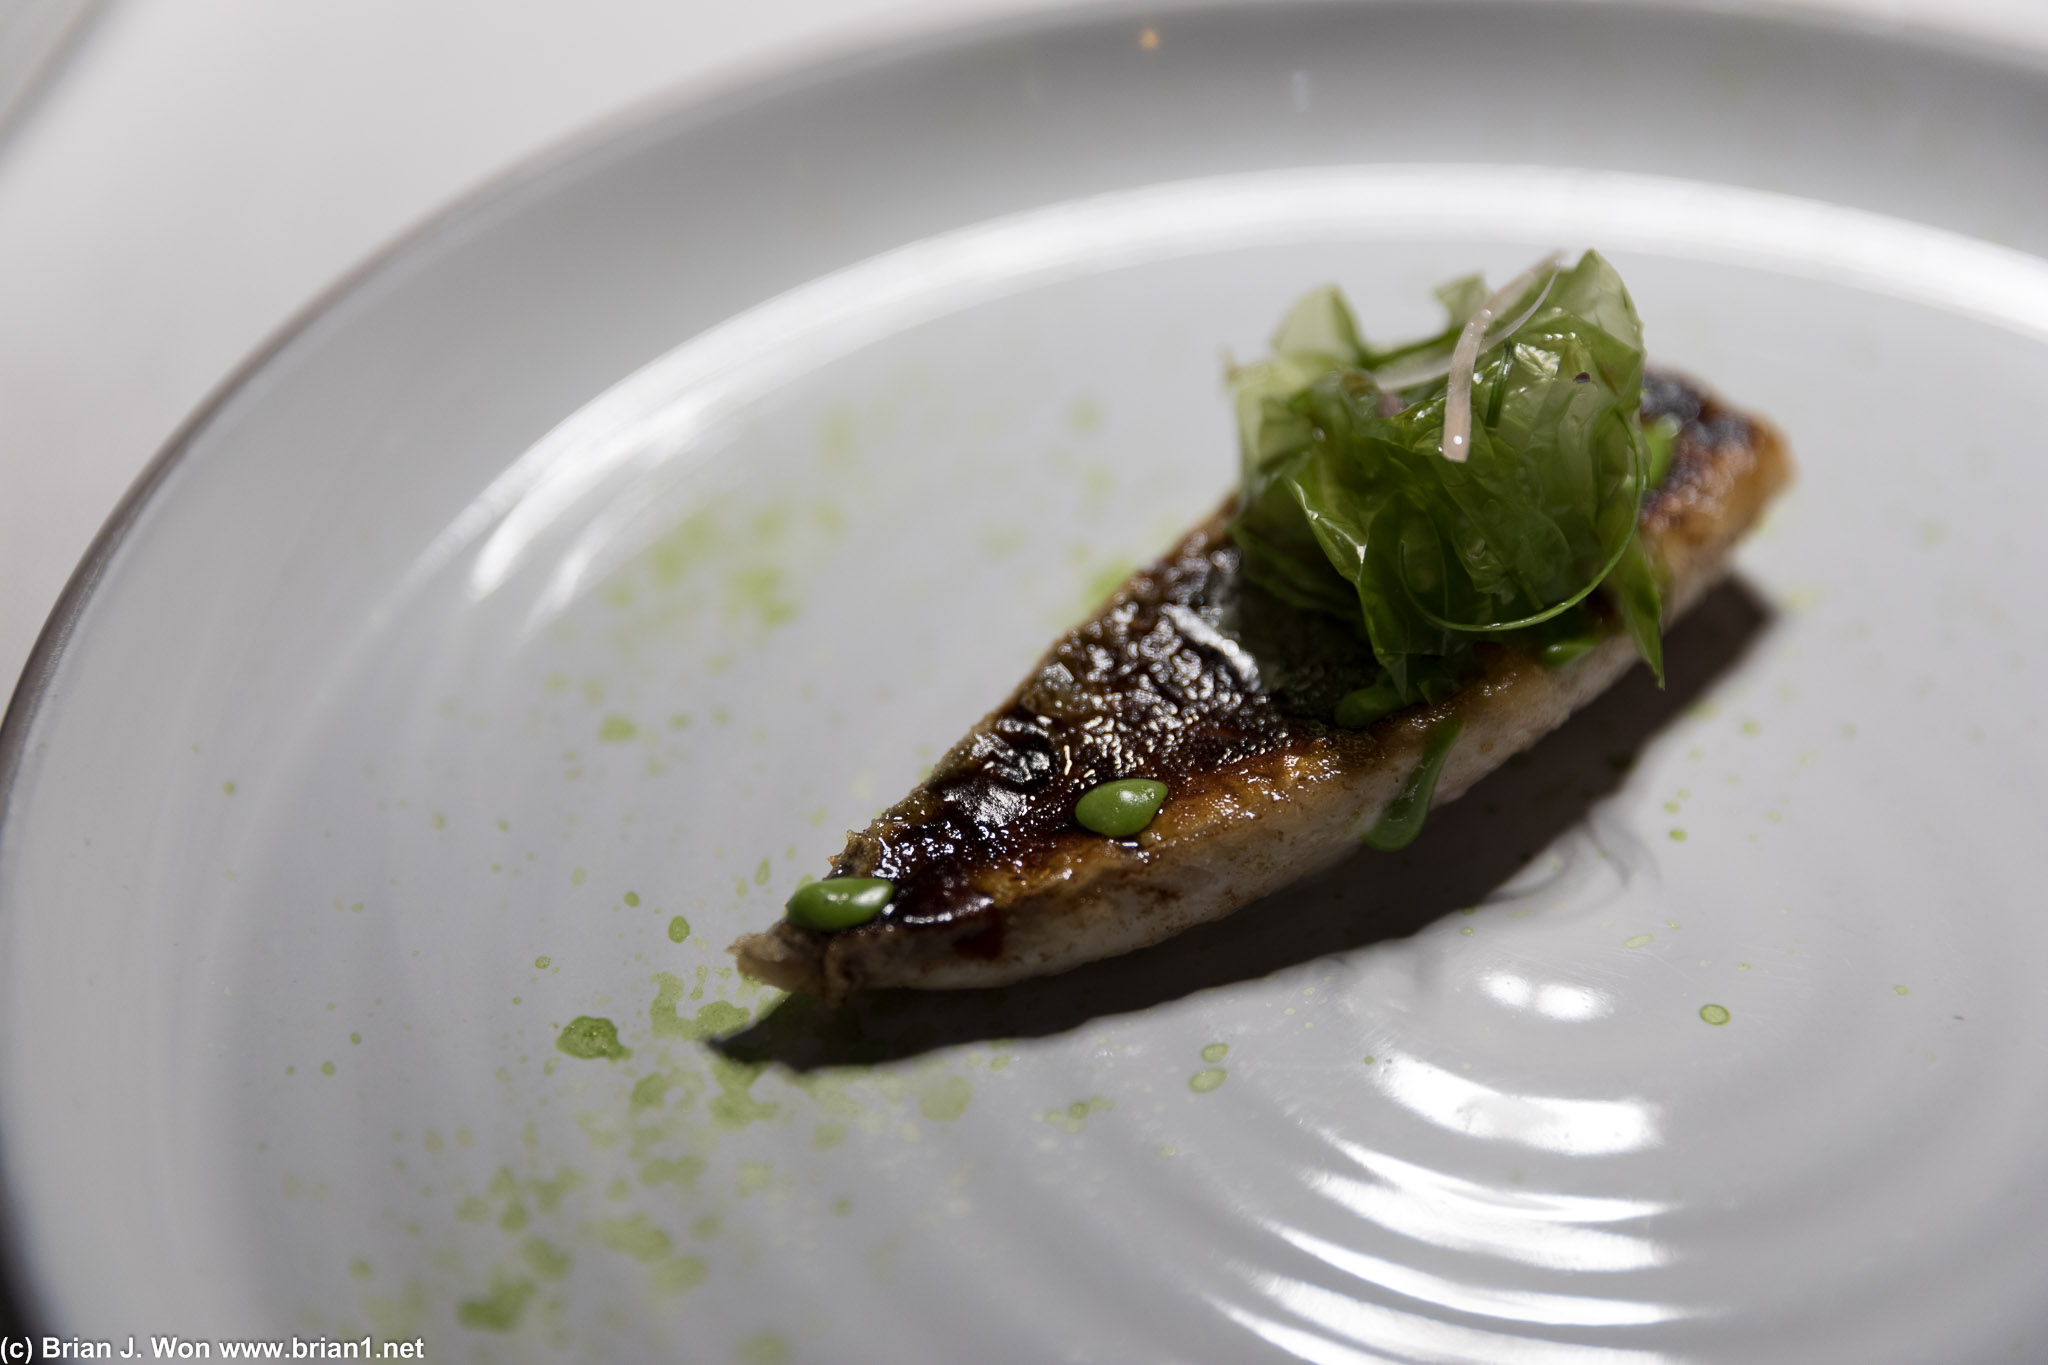 Fish to the Testo. Grilled mackerel, was it? Good but again, not special.